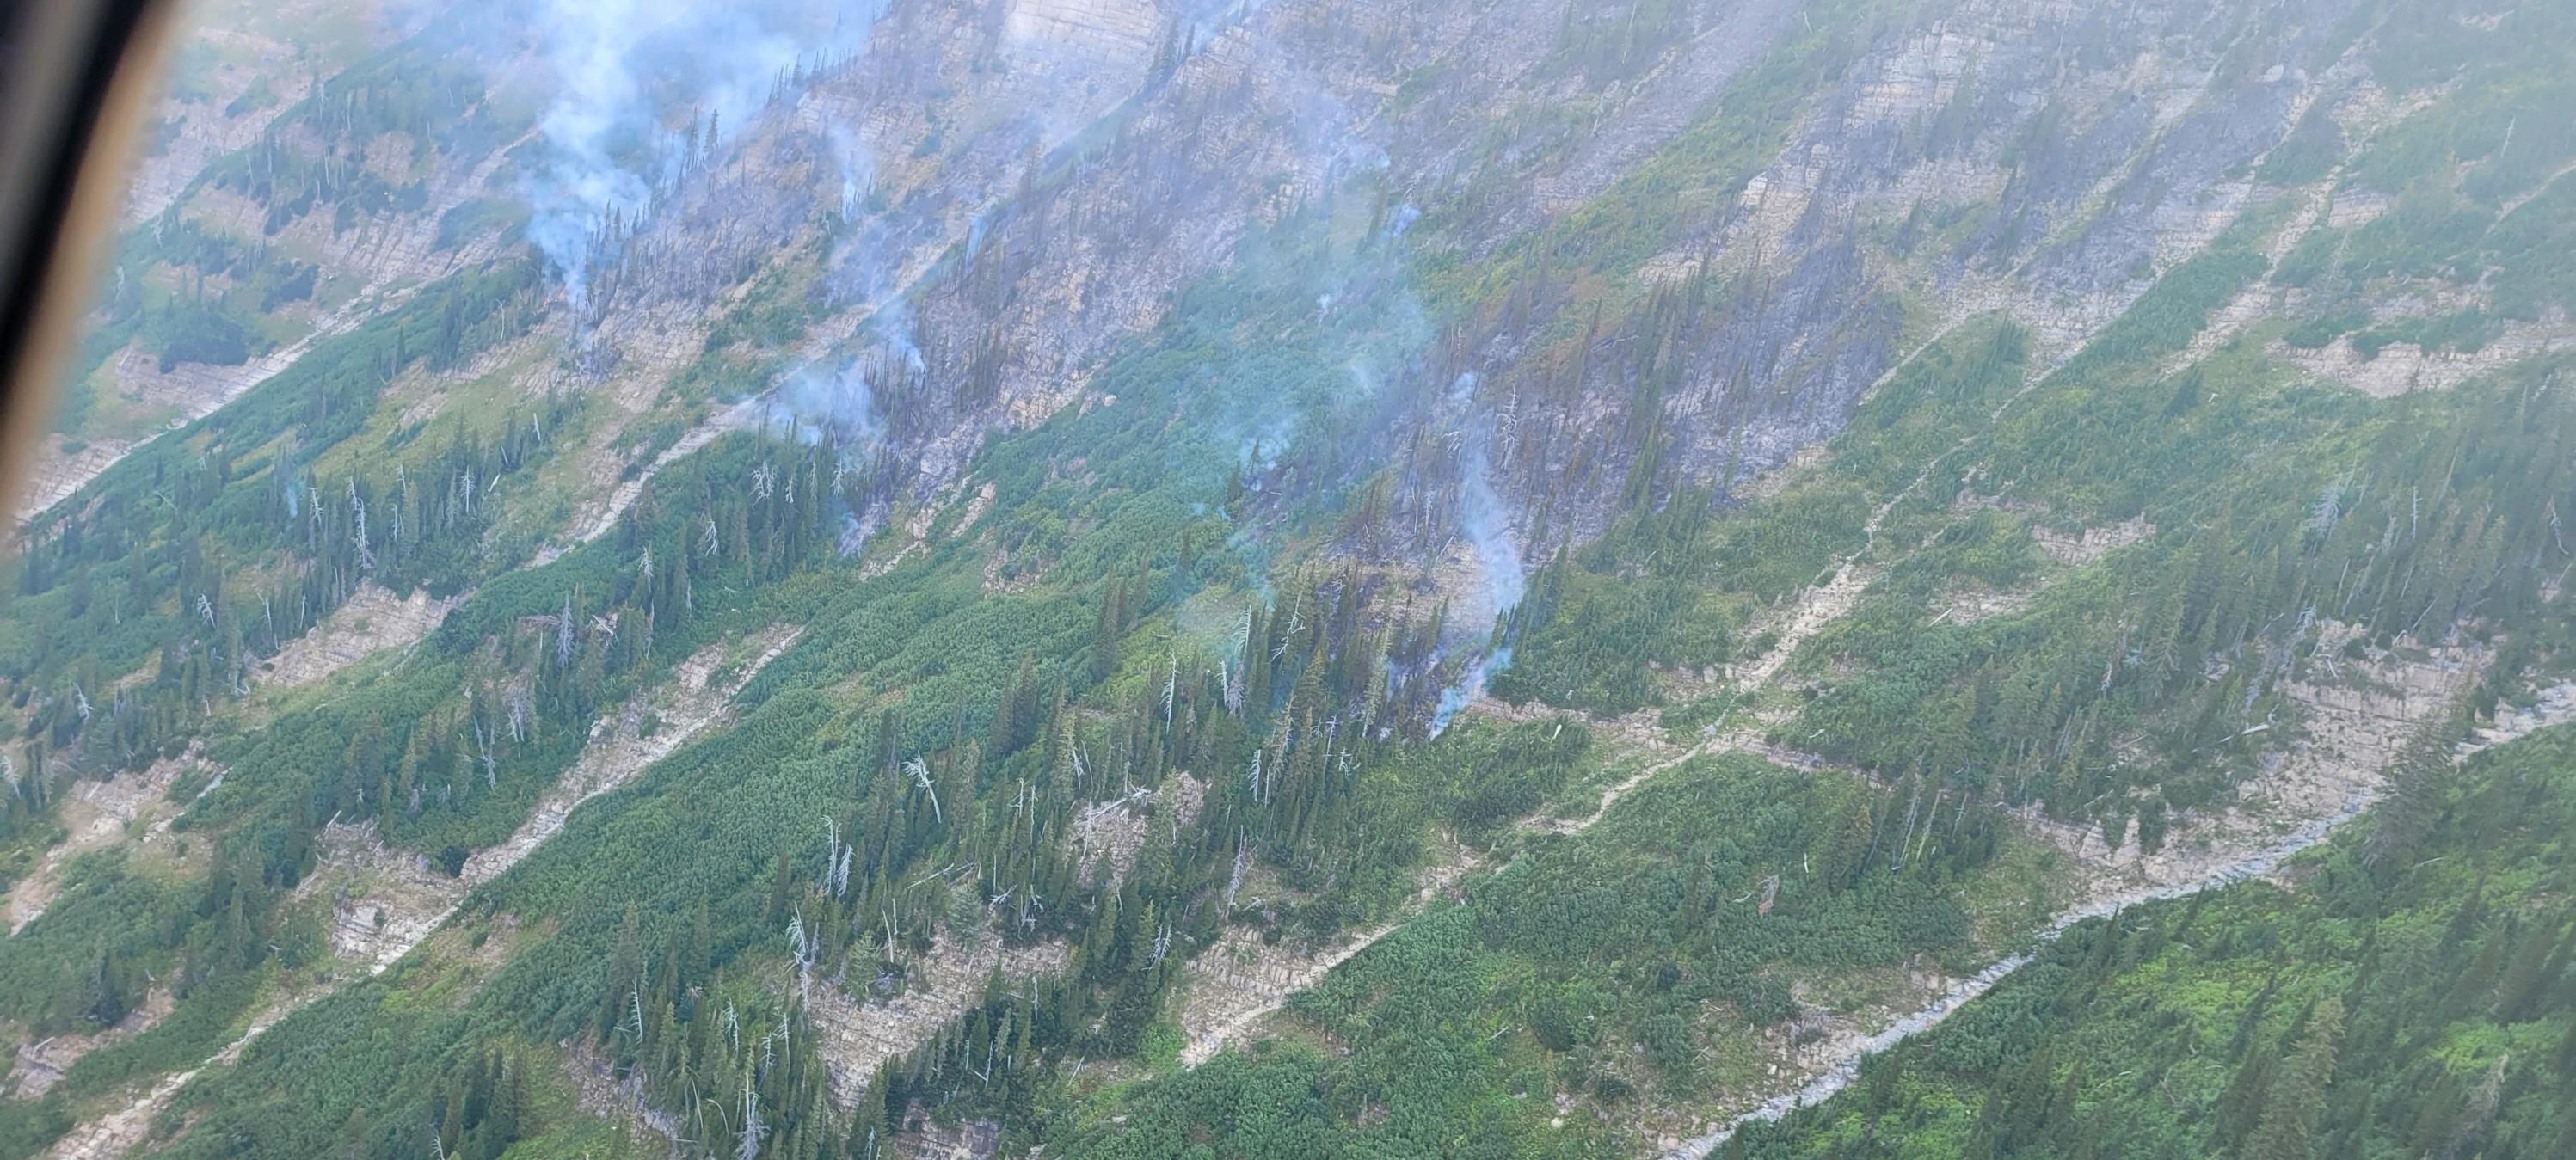 A photo shot from a helicopter showing smoke rising from fire smoldering in sparse trees interspersed with shrubs.